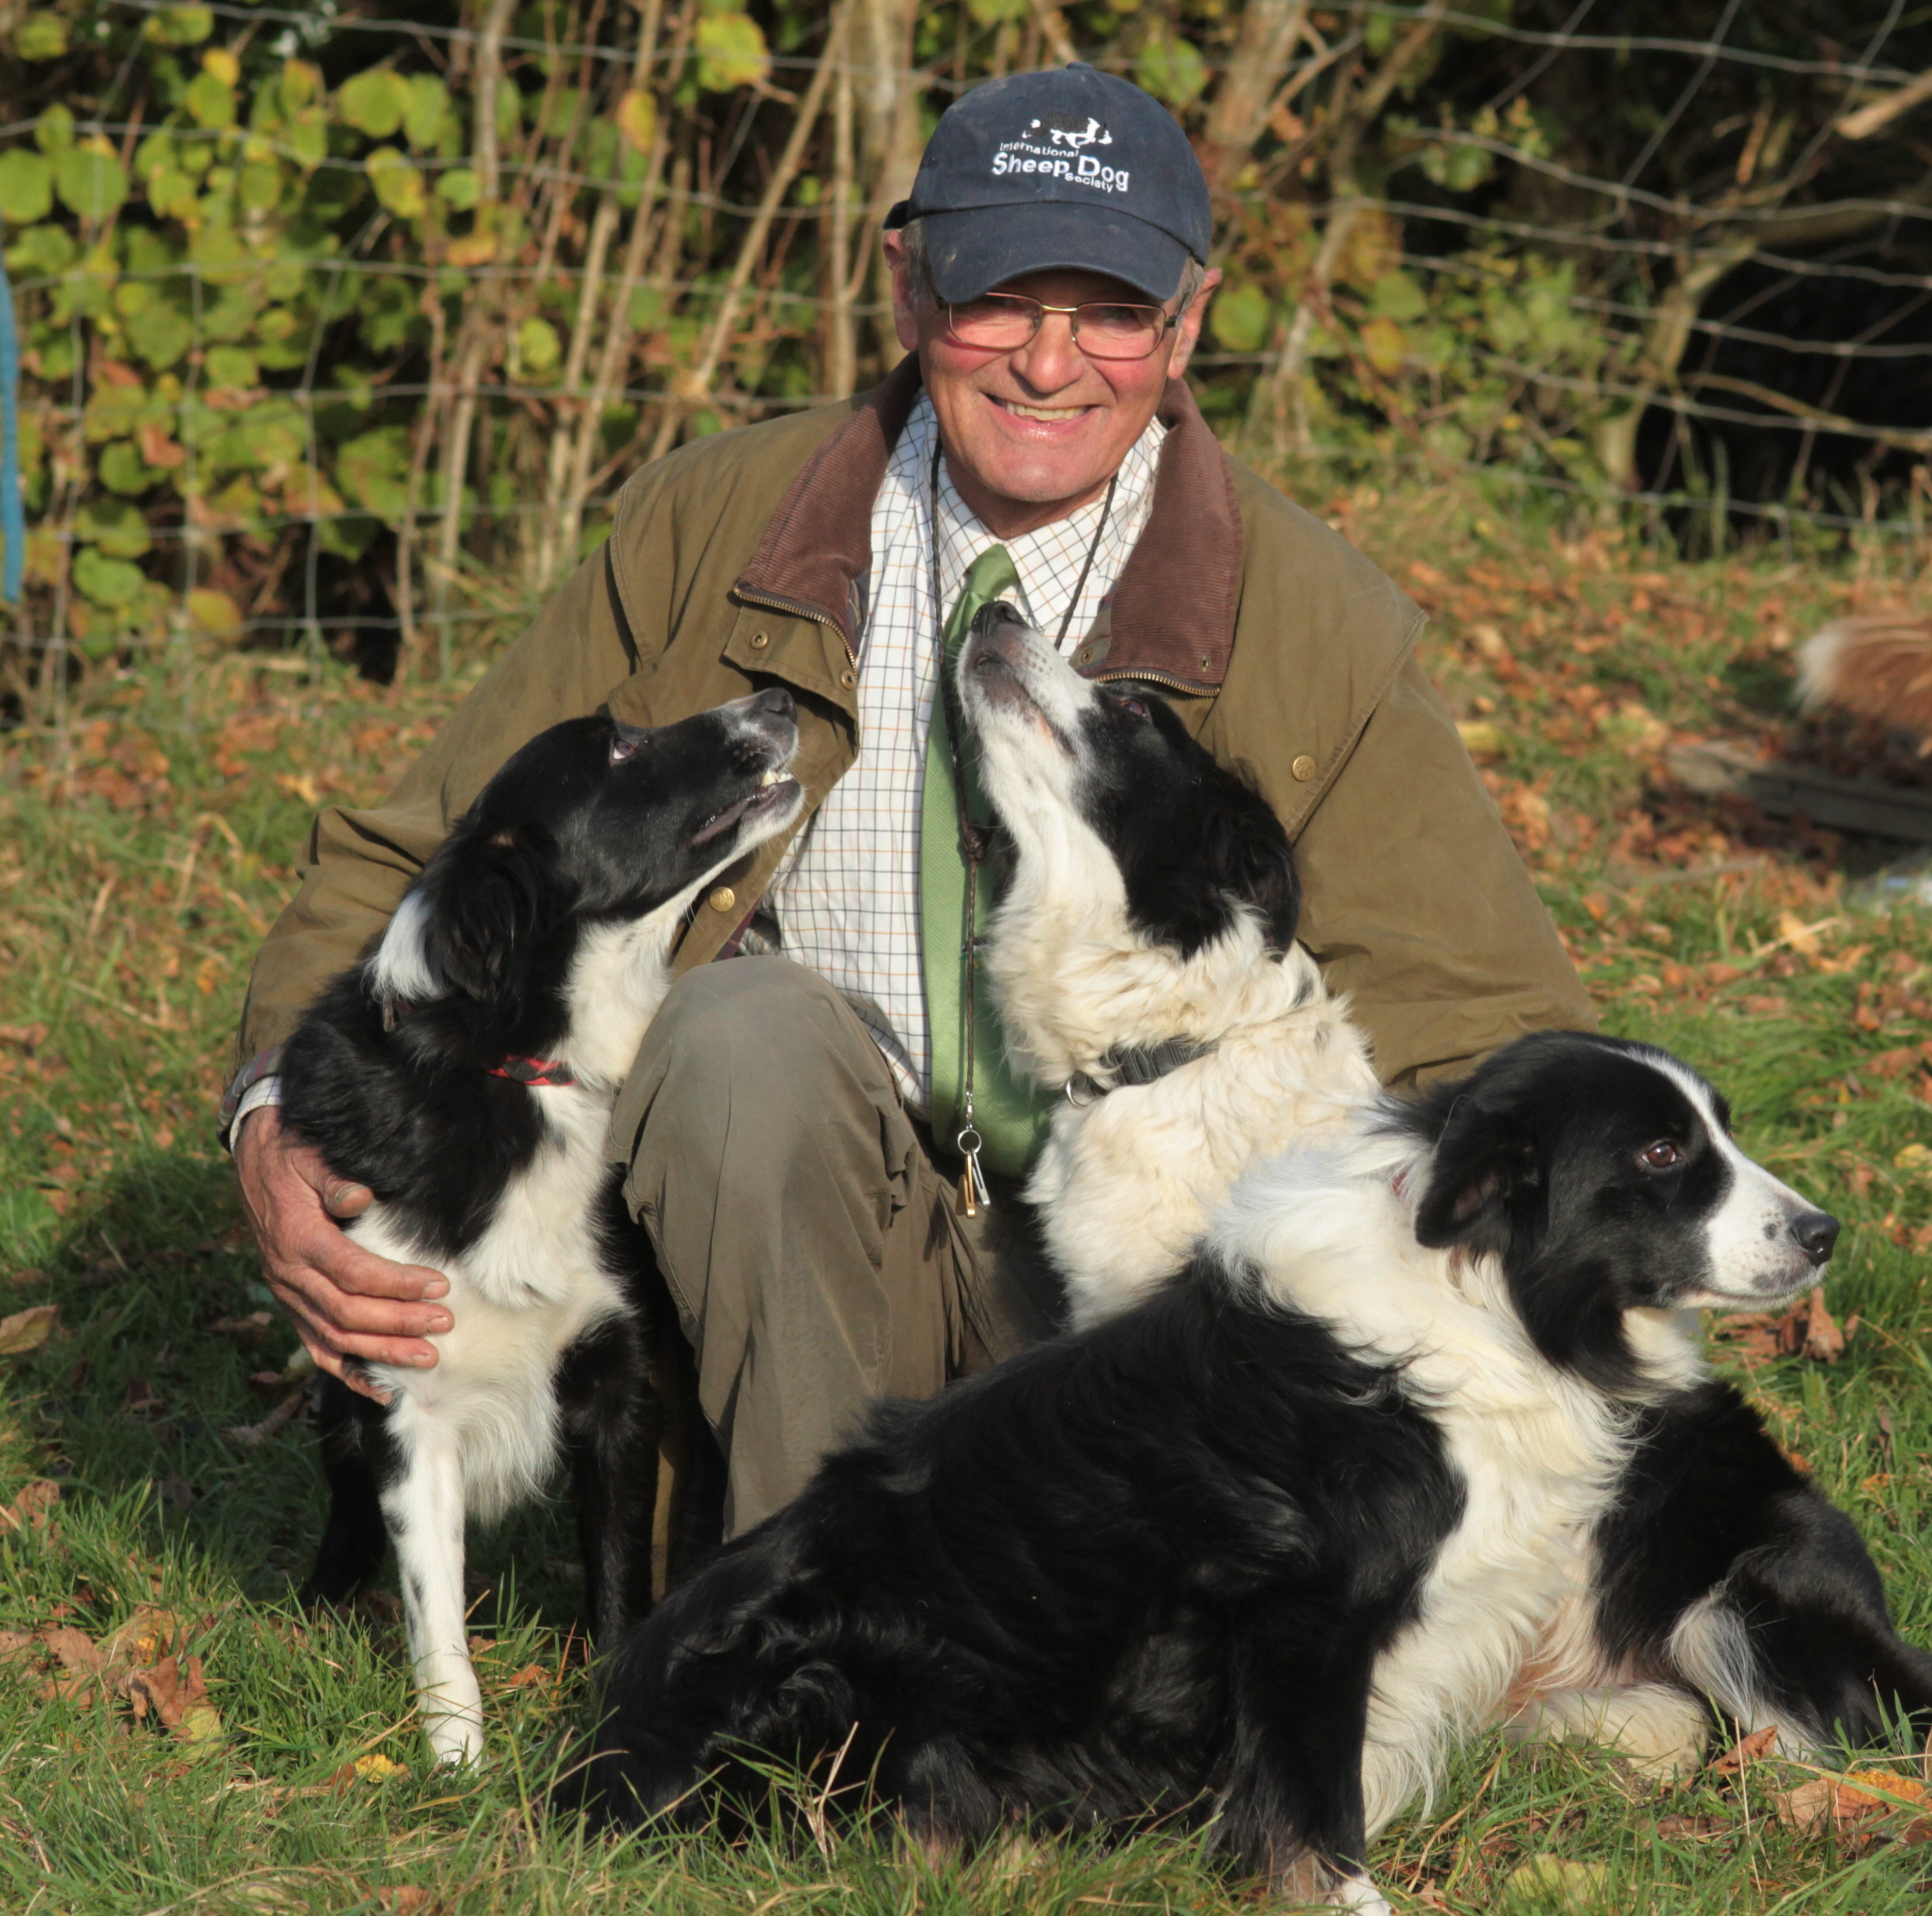 al with his beautiful border collies